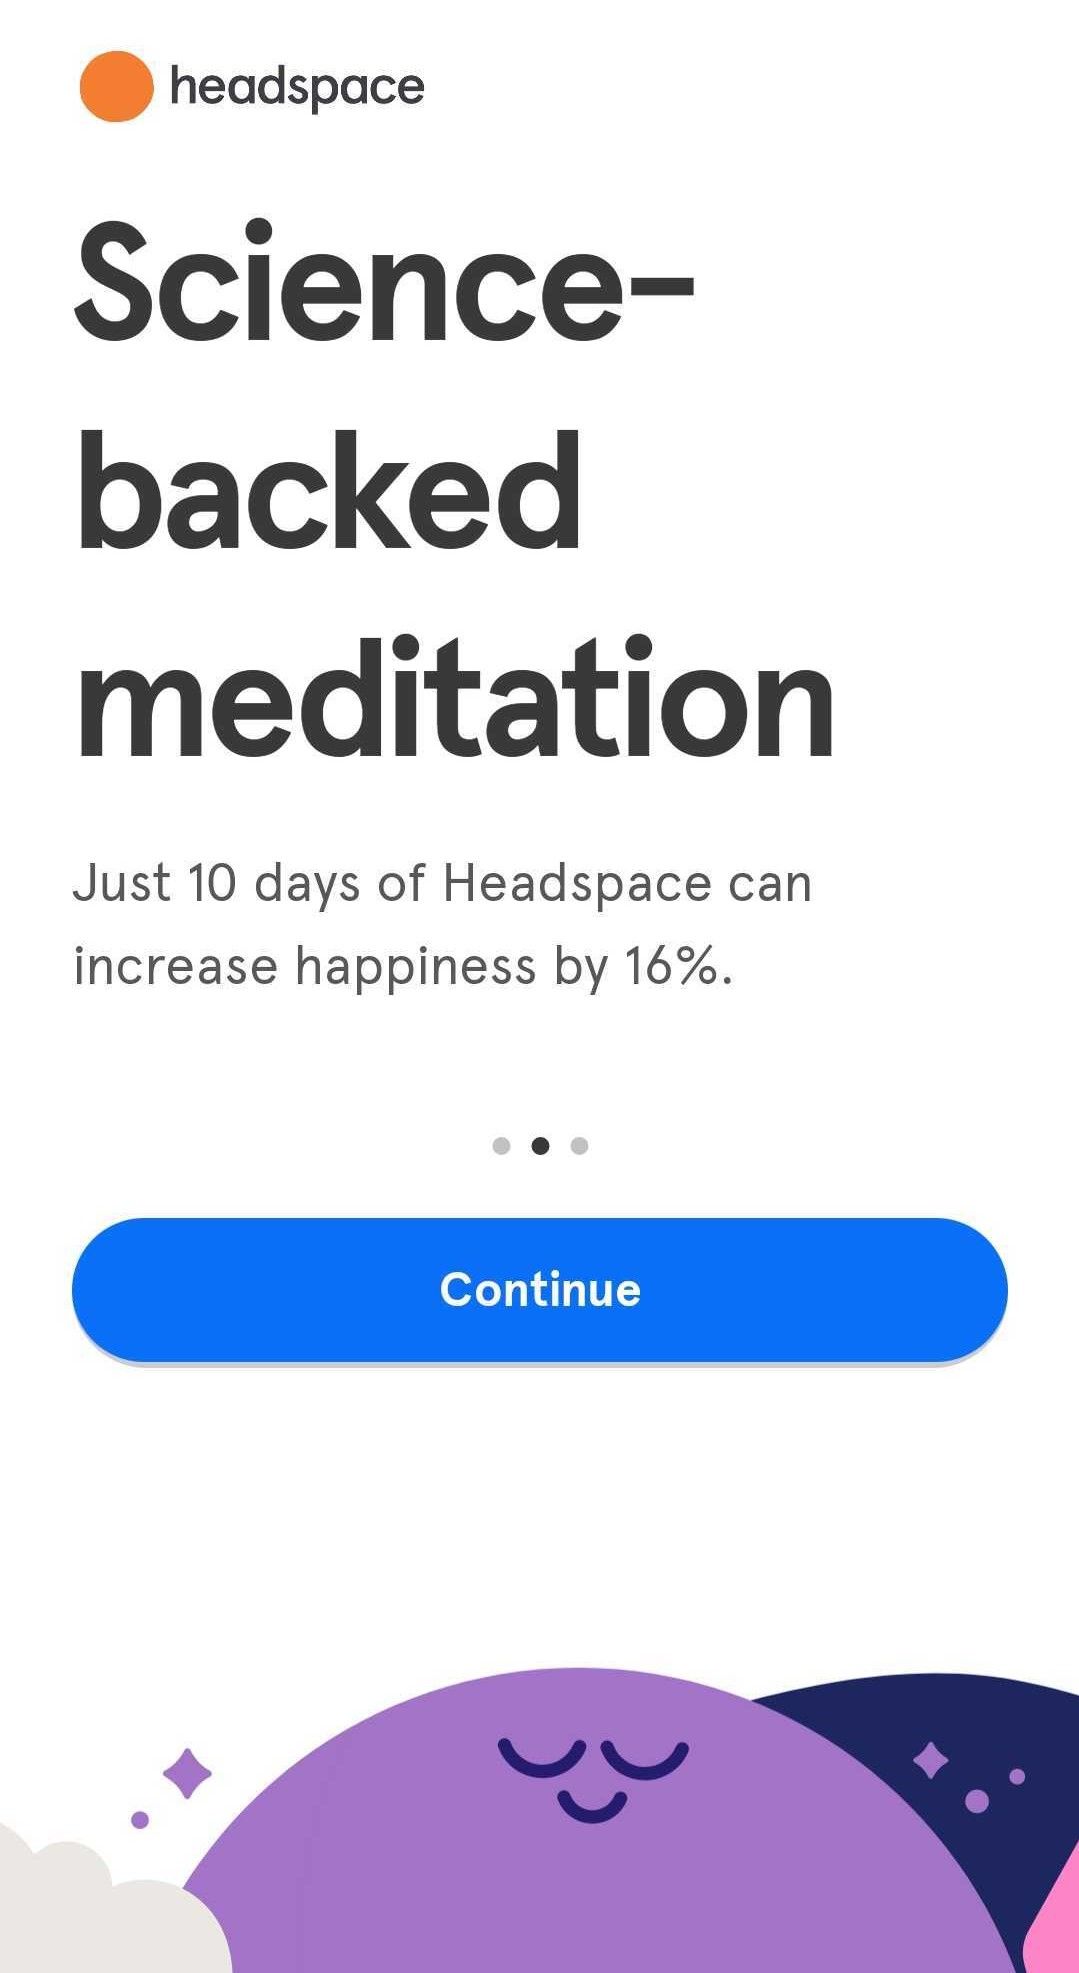 Meditations in Headspace’s premium access subscription can are stored in a library (*shots from [Calm App](https://www.headspace.com/){ rel="nofollow" target="_blank" .default-md}*)